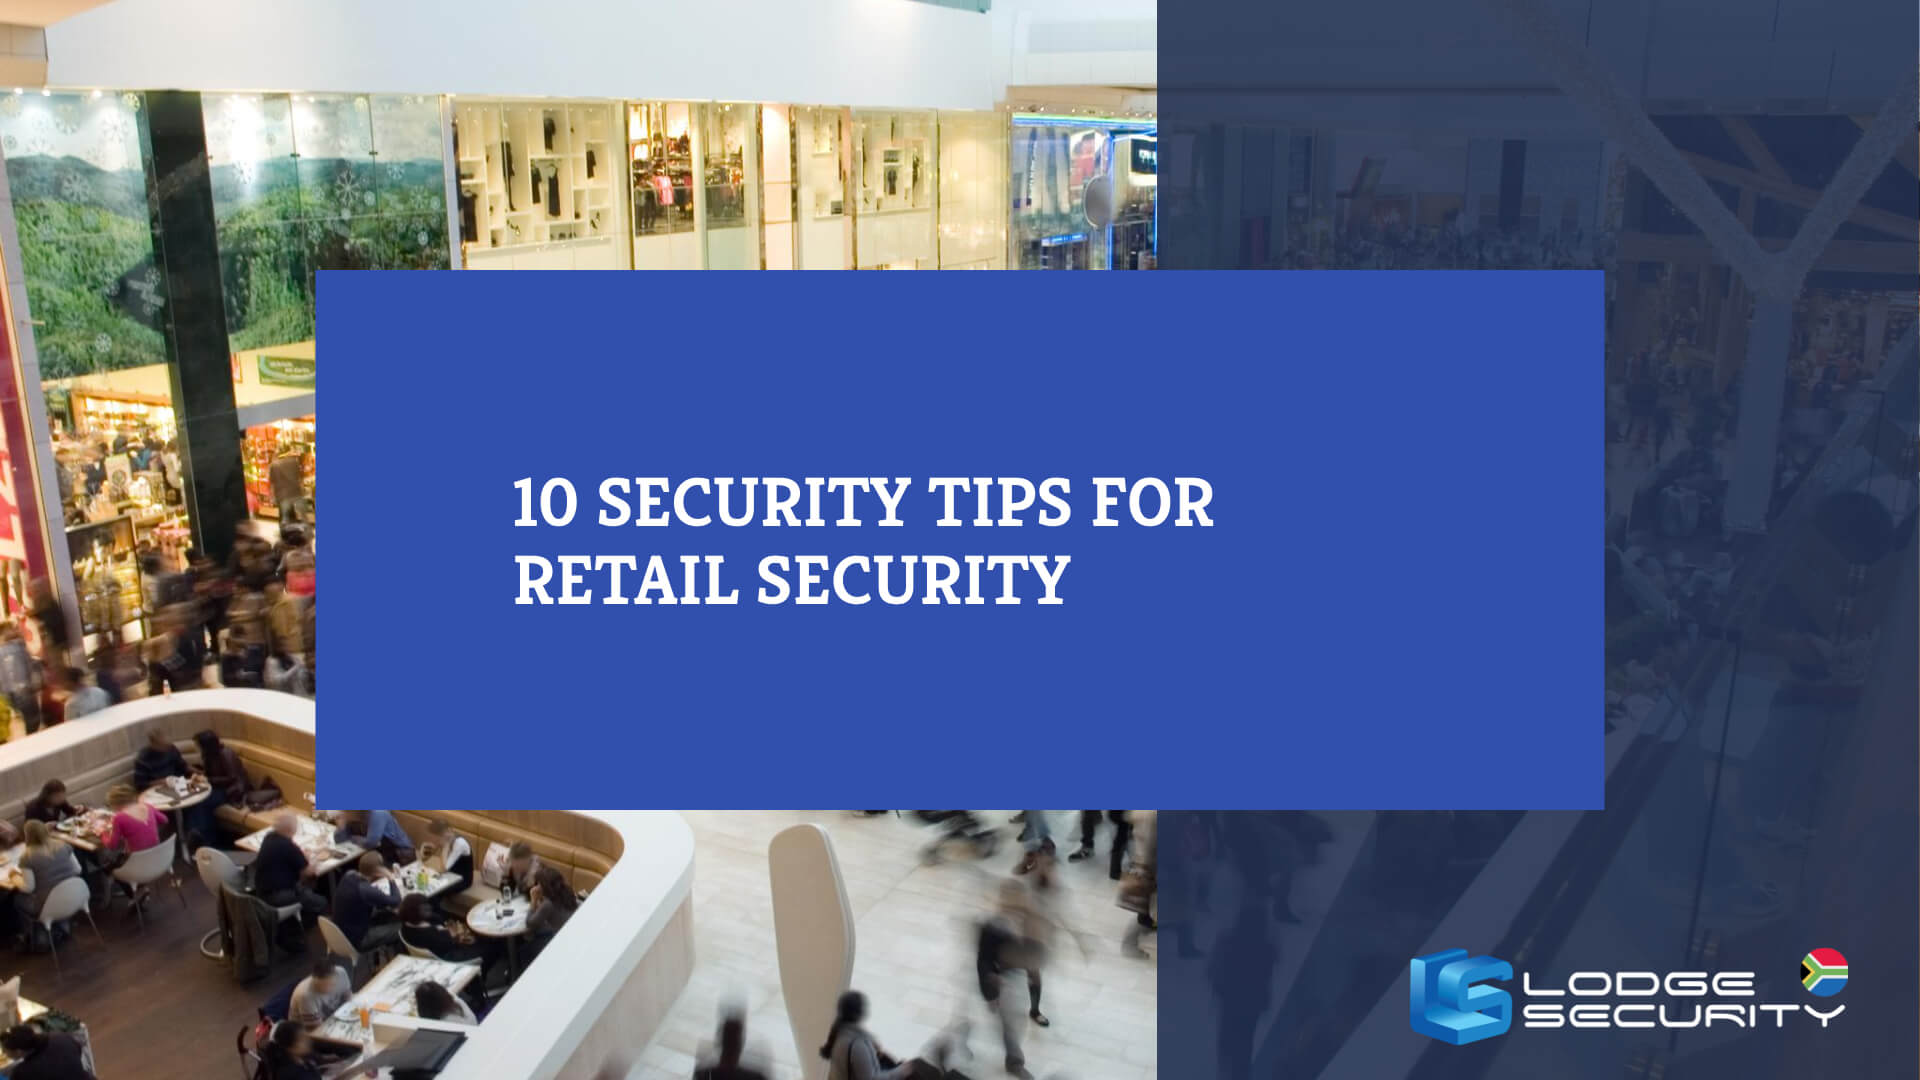 10 Retail Security Tips in South Africa